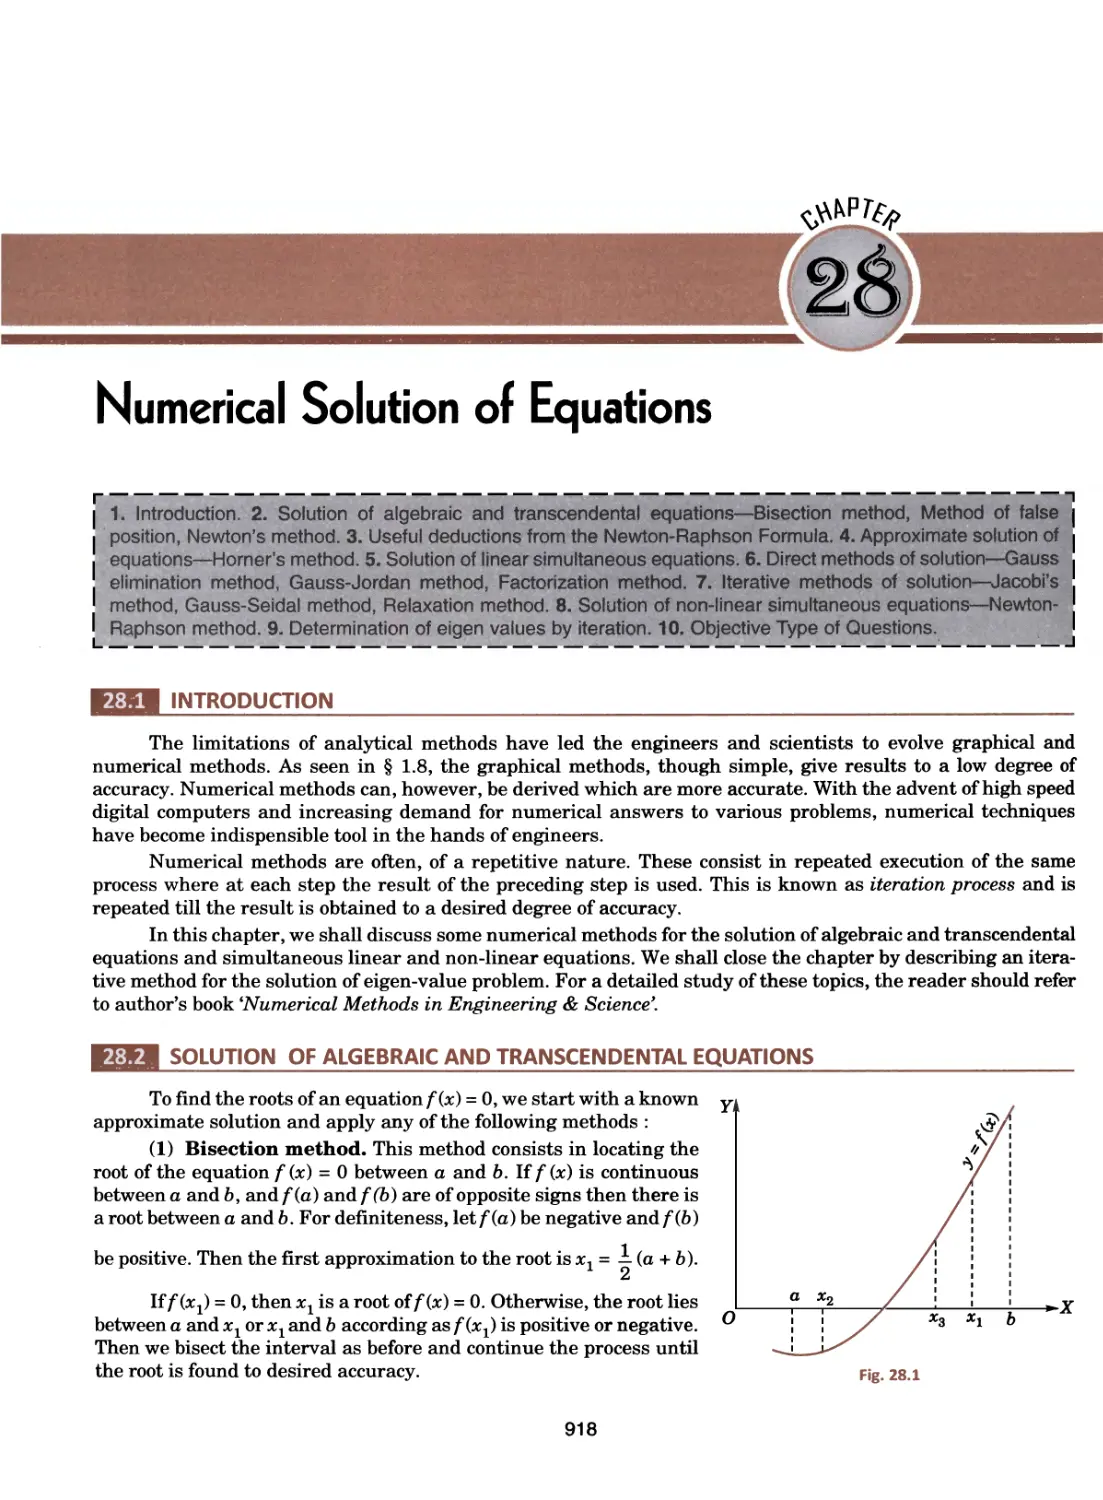 28.Numerical Solution of Equations 918